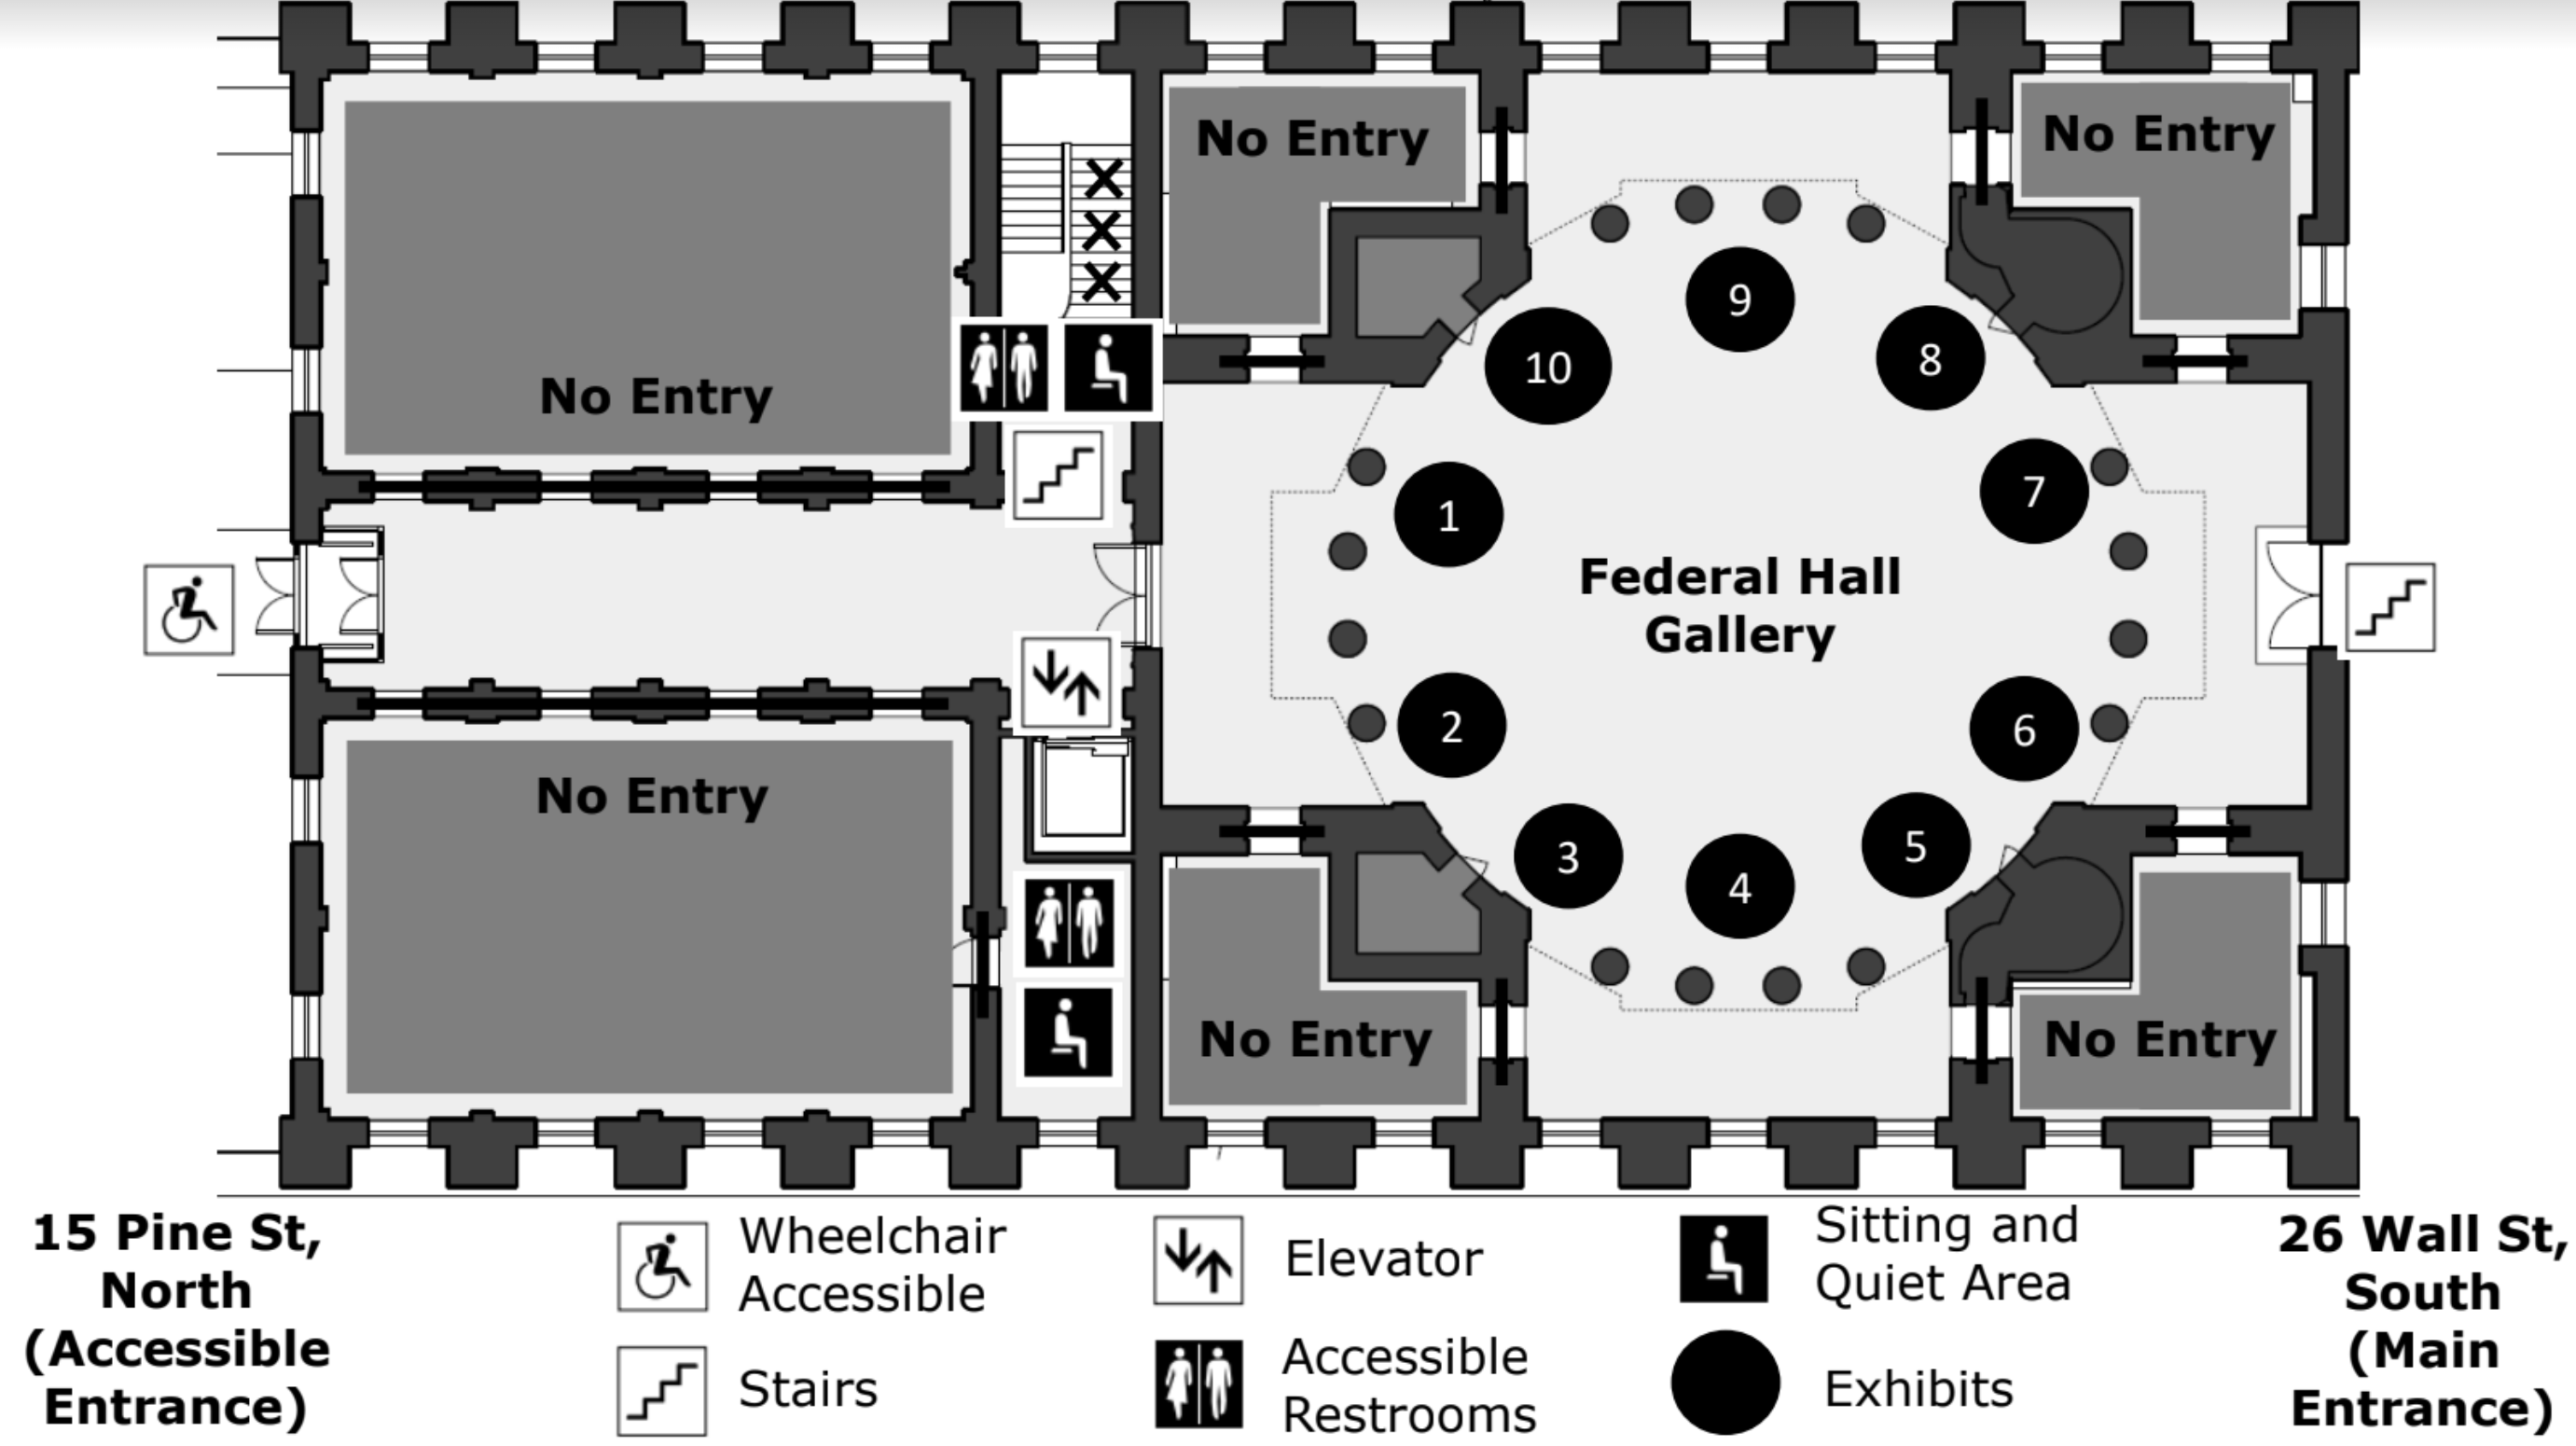 A spatial map of Federal Hall